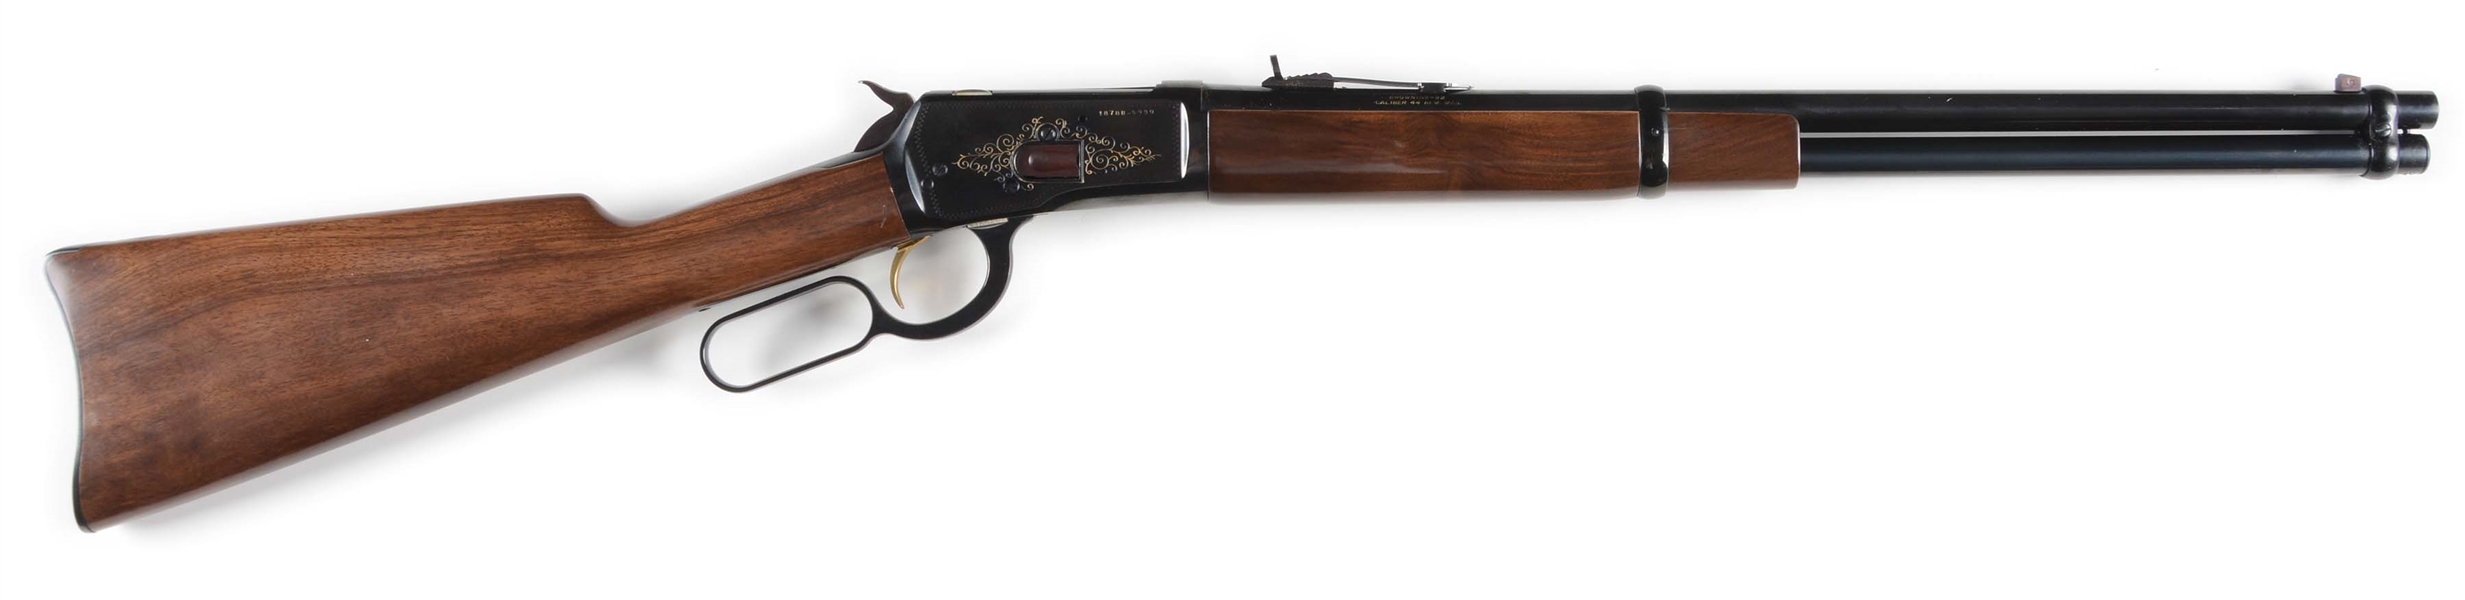 (M) BROWNING 92 LEVER-ACTION RIFLE.